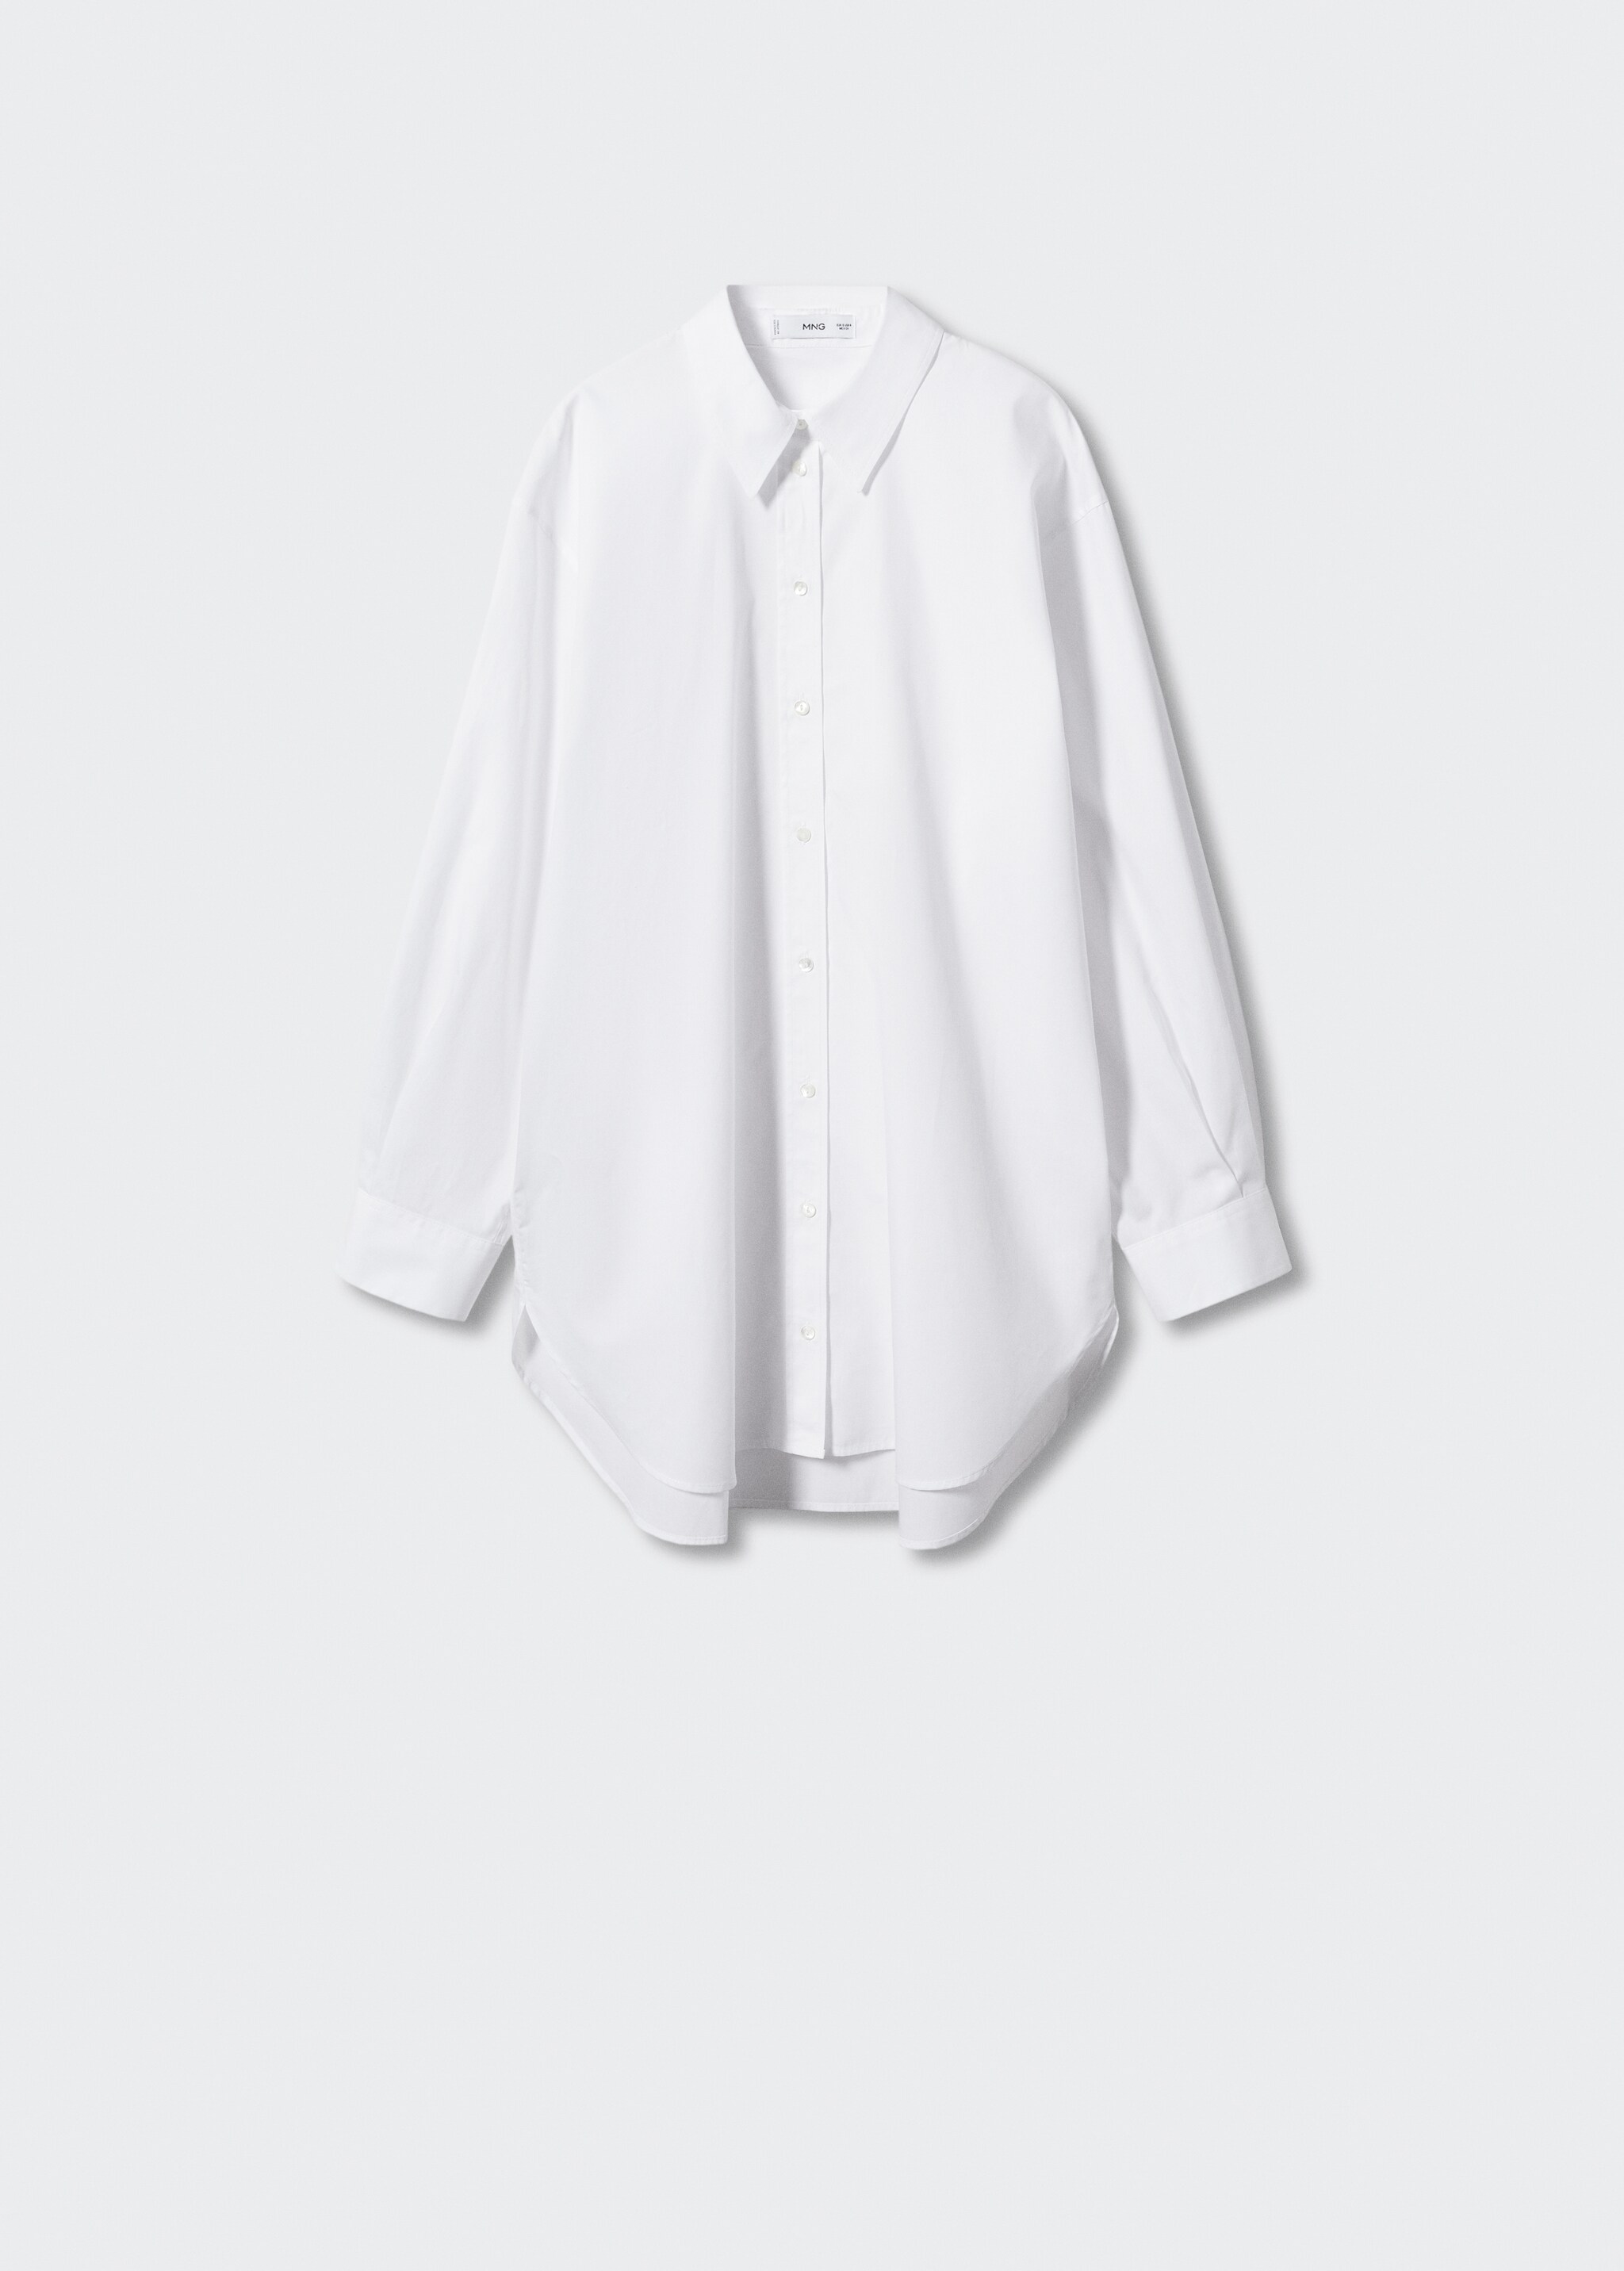 Cotton long shirt - Article without model